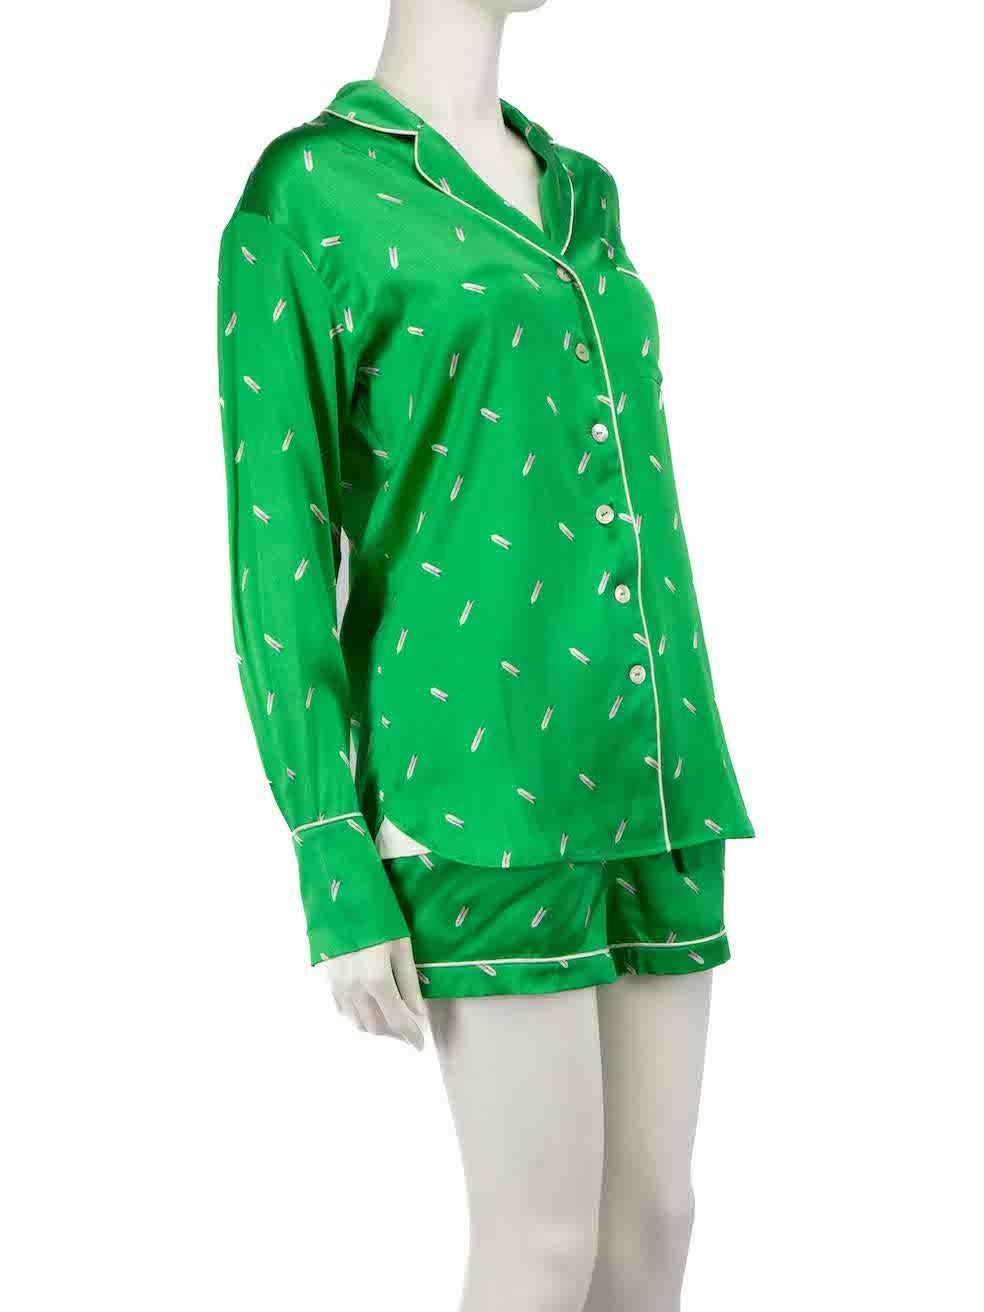 CONDITION is Never worn. No visible wear to pyjamas is evident on this new Olivia Von Halle designer resale item.
 
 
 
 Details
 
 
 A/W18
 
 Green
 
 Silk
 
 Pyjama set
 
 Arrow pattern
 
 Long sleeve blouse
 
 Button up fastening
 
 1x Front